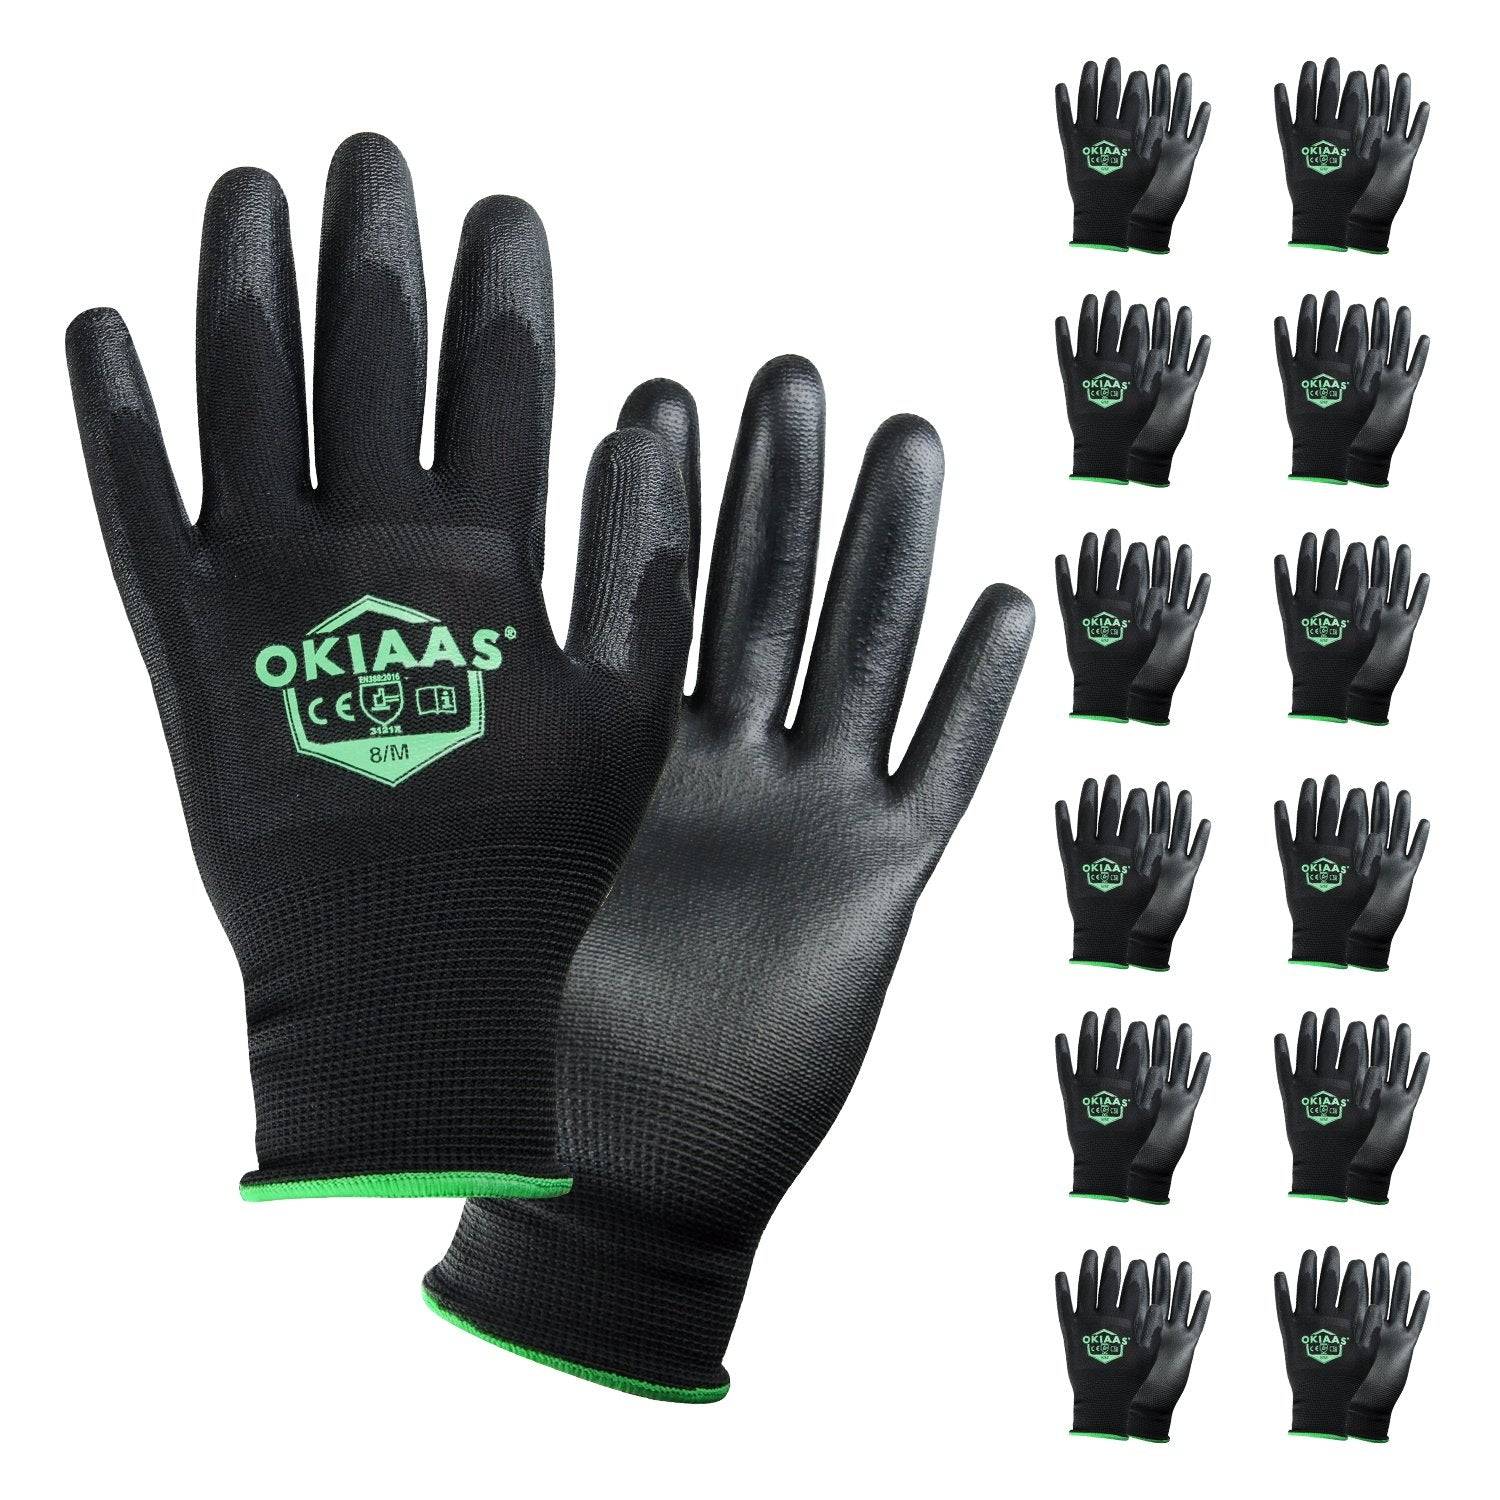 OKIAAS 12 Pairs Safety Work Gloves with PU Coated, for Mechanic, Warehouse, Gardening